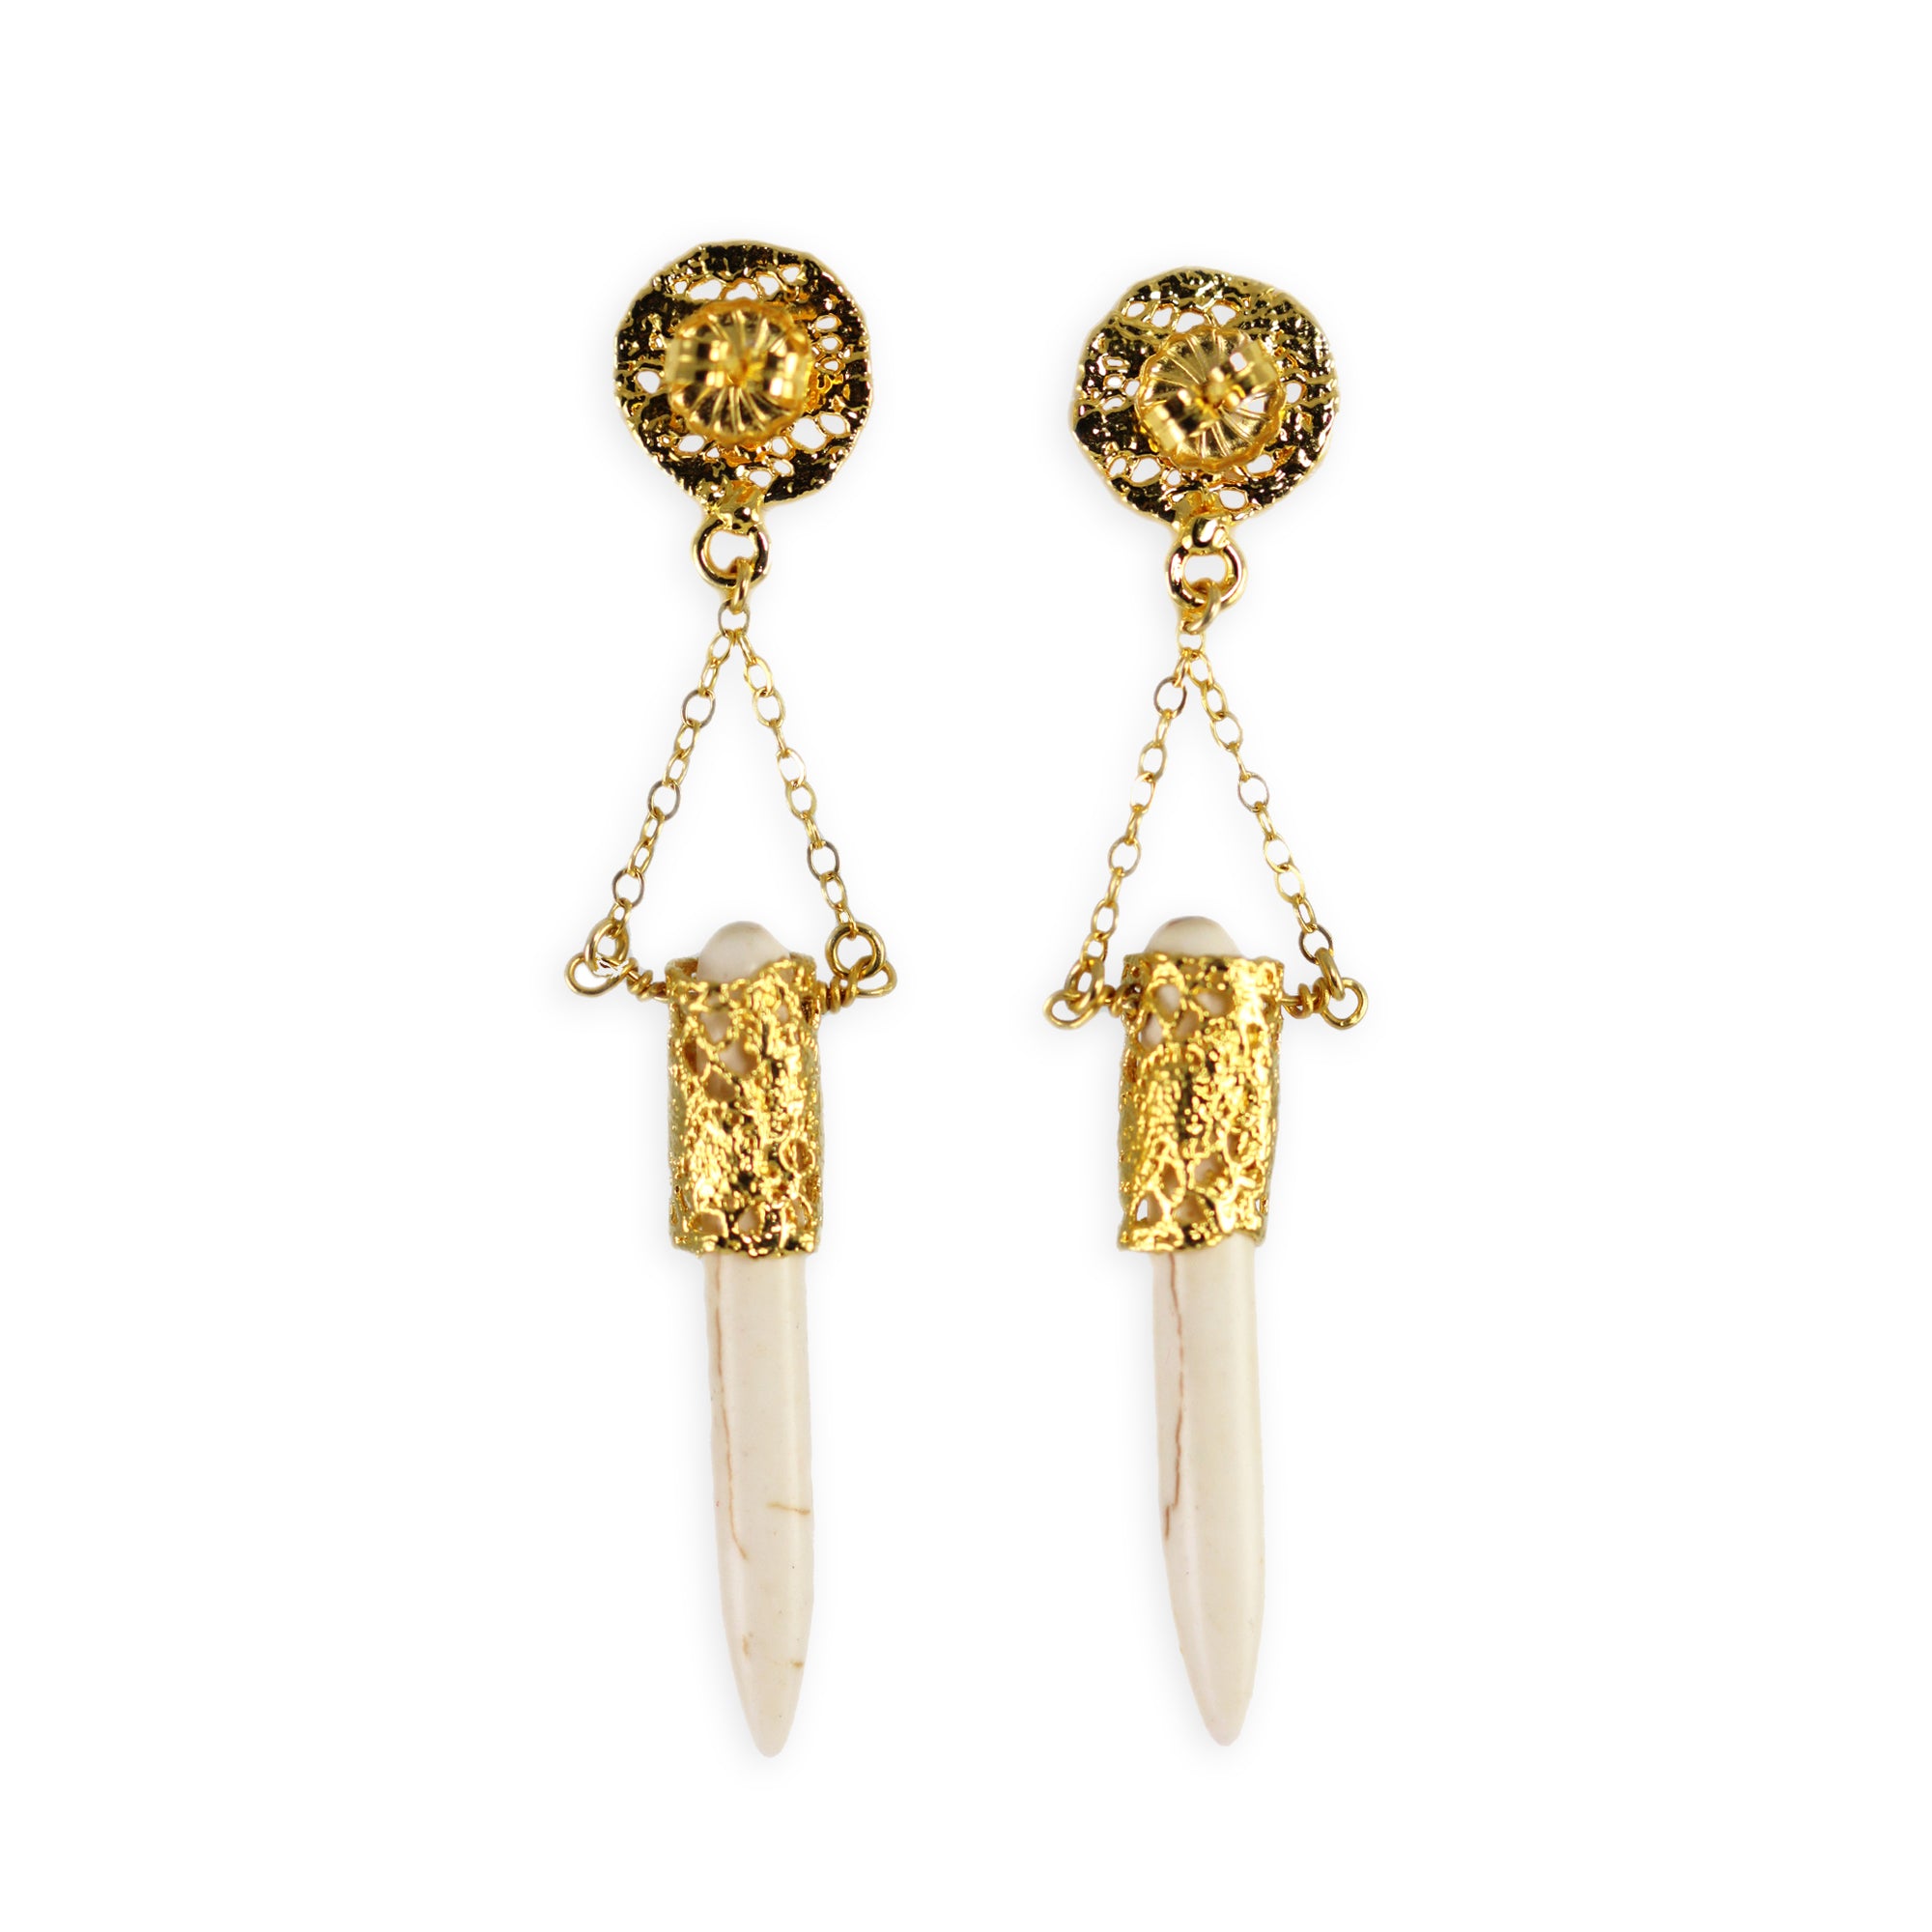 Chandelier lace earrings in 24k gold with white turquoise wands.